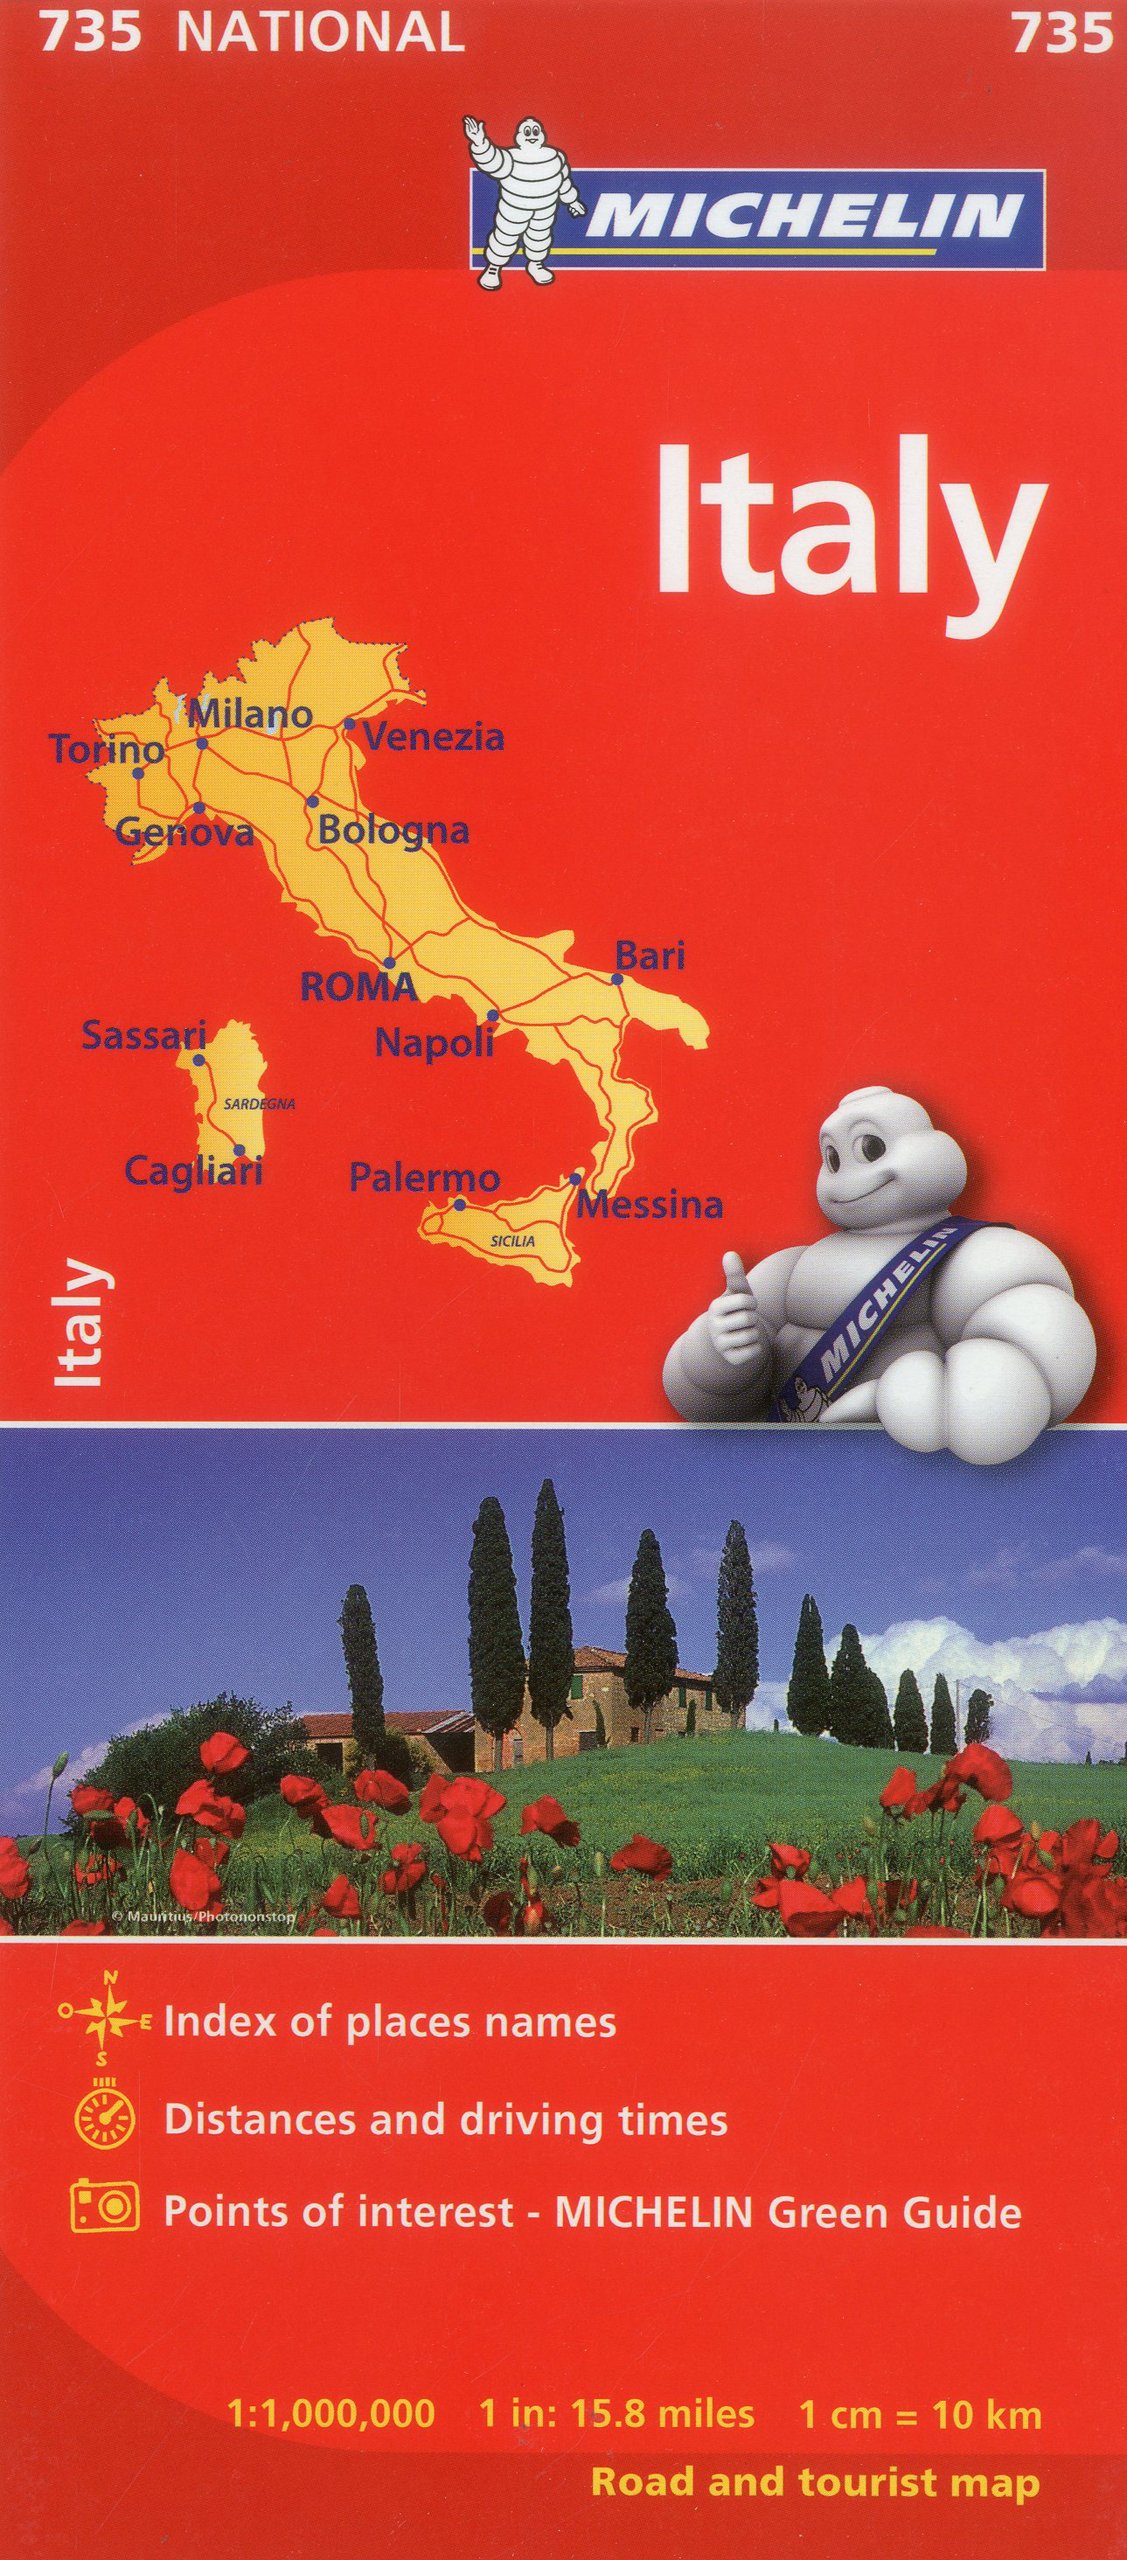 Italy - Michelin National Map 735